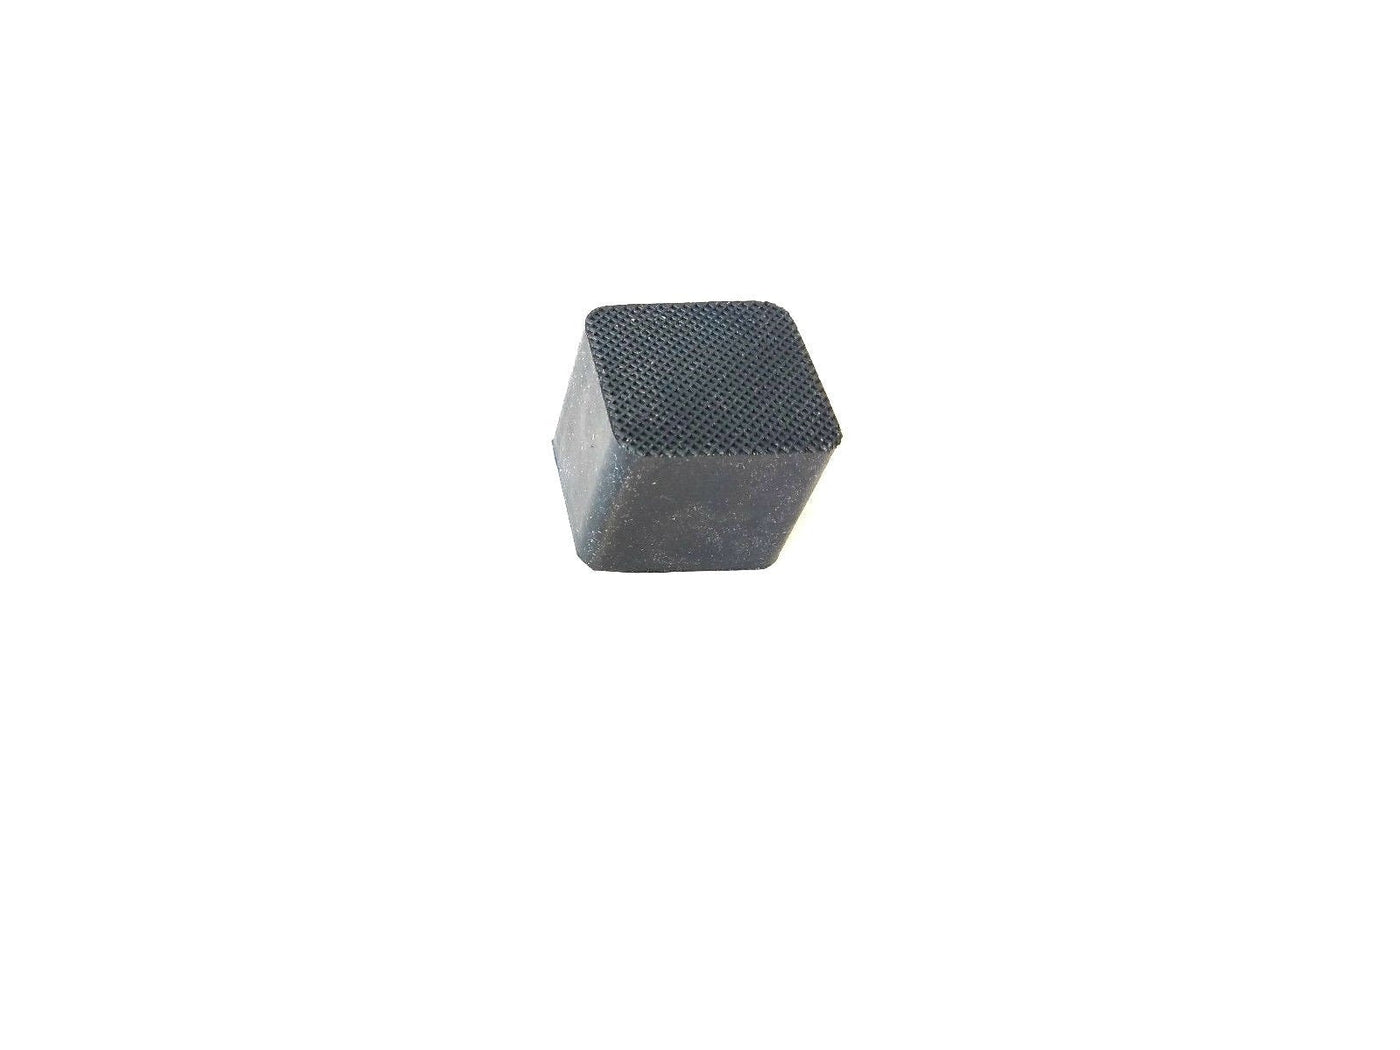 Square Rubber Feet Cap Tip For Chair Stool Or Table Legs 1 X 1